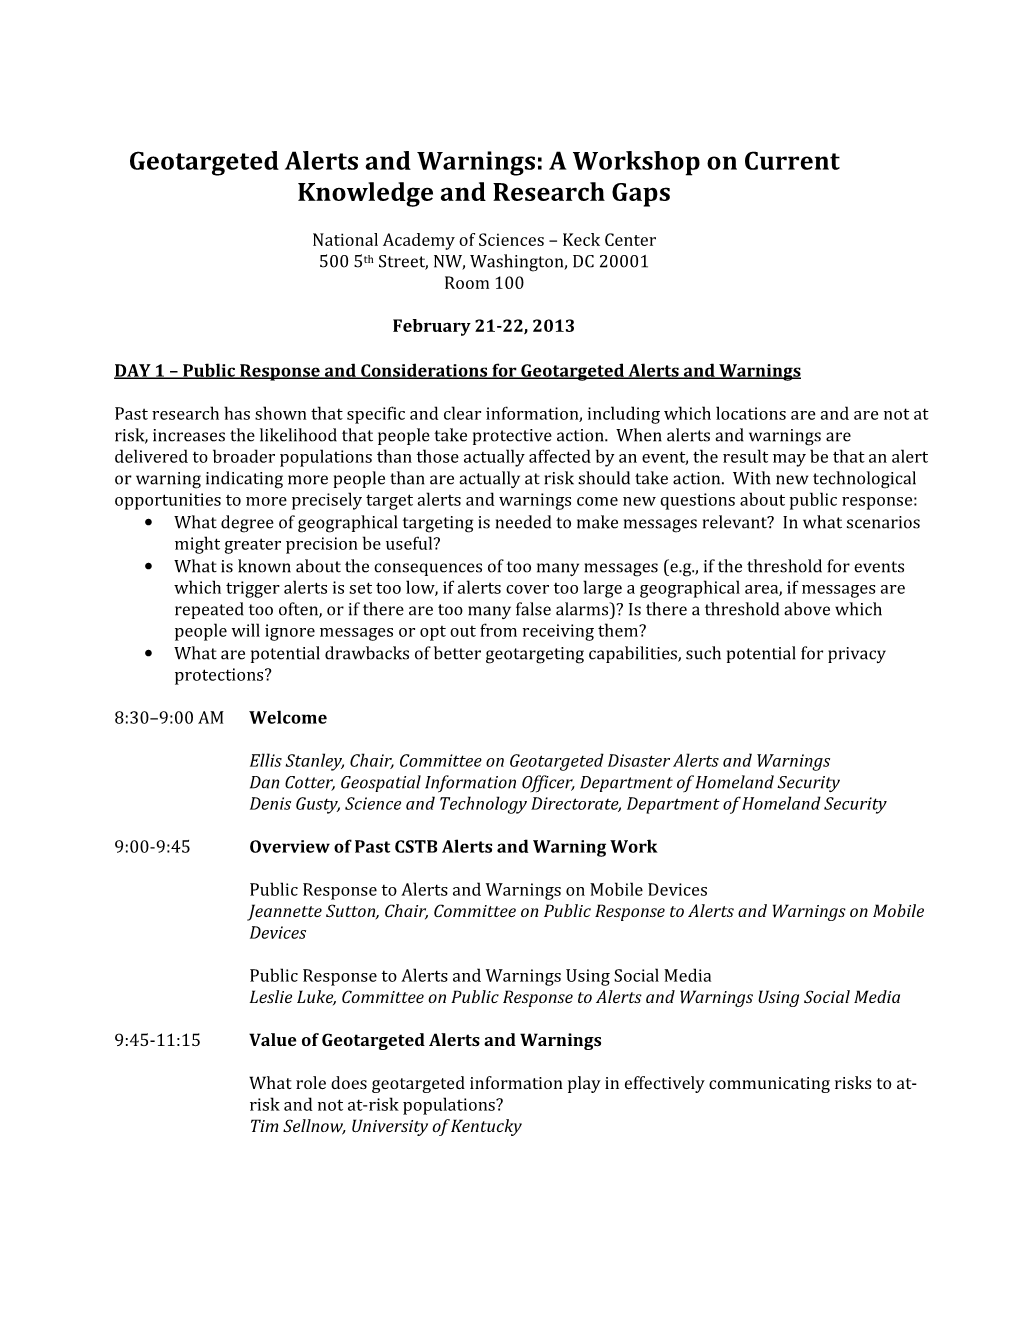 Geotargeted Alerts and Warnings: a Workshop on Current Knowledge and Research Gaps